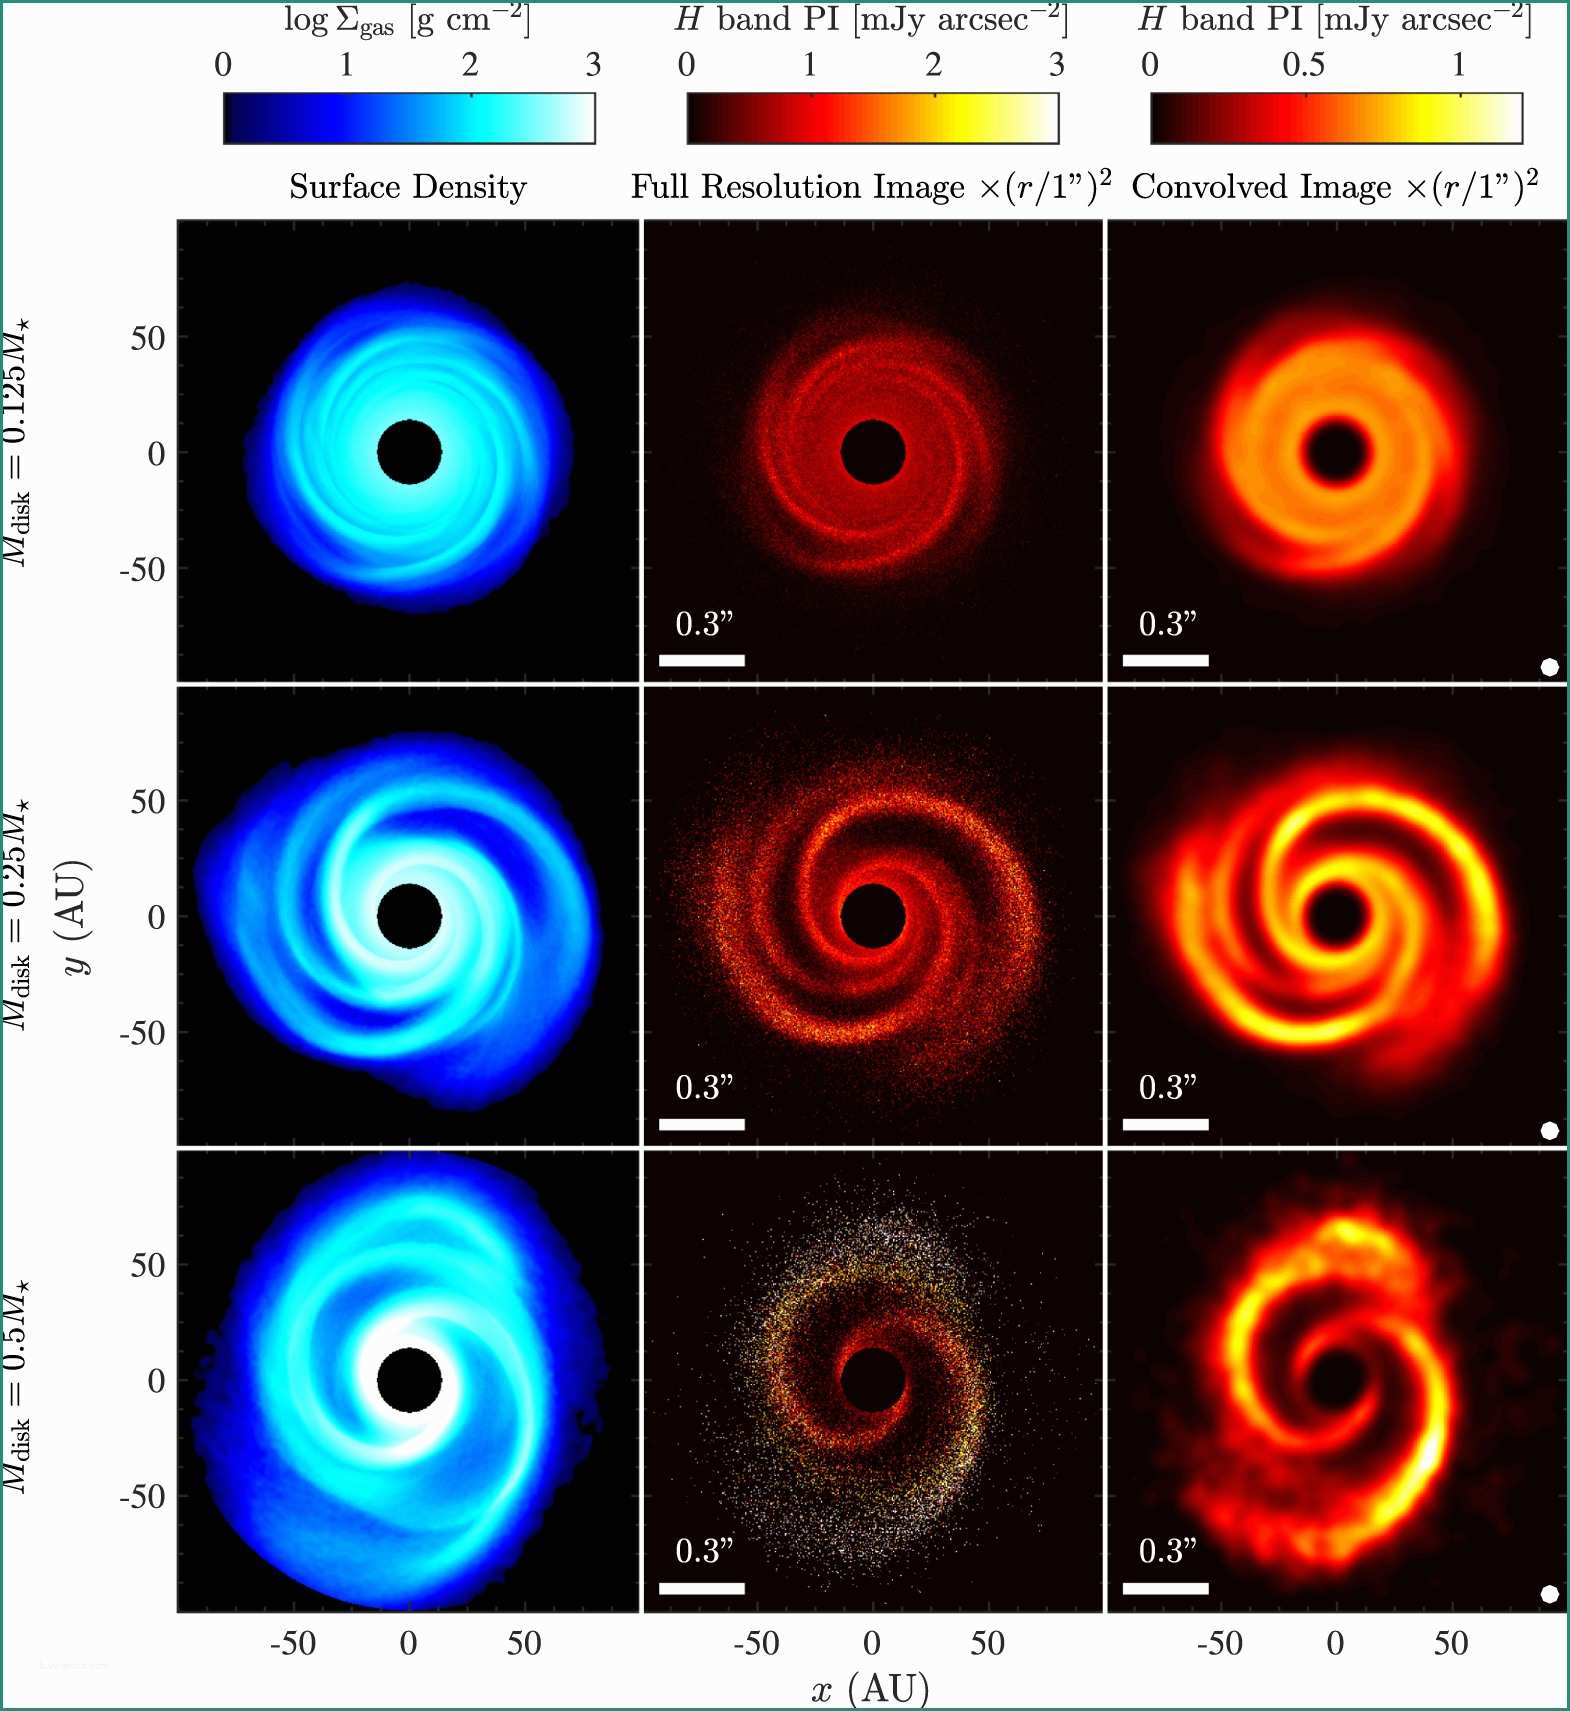 Ssml Gregorio Vii E Spiral Arms In Gravitationally Unstable Protoplanetary Disks as